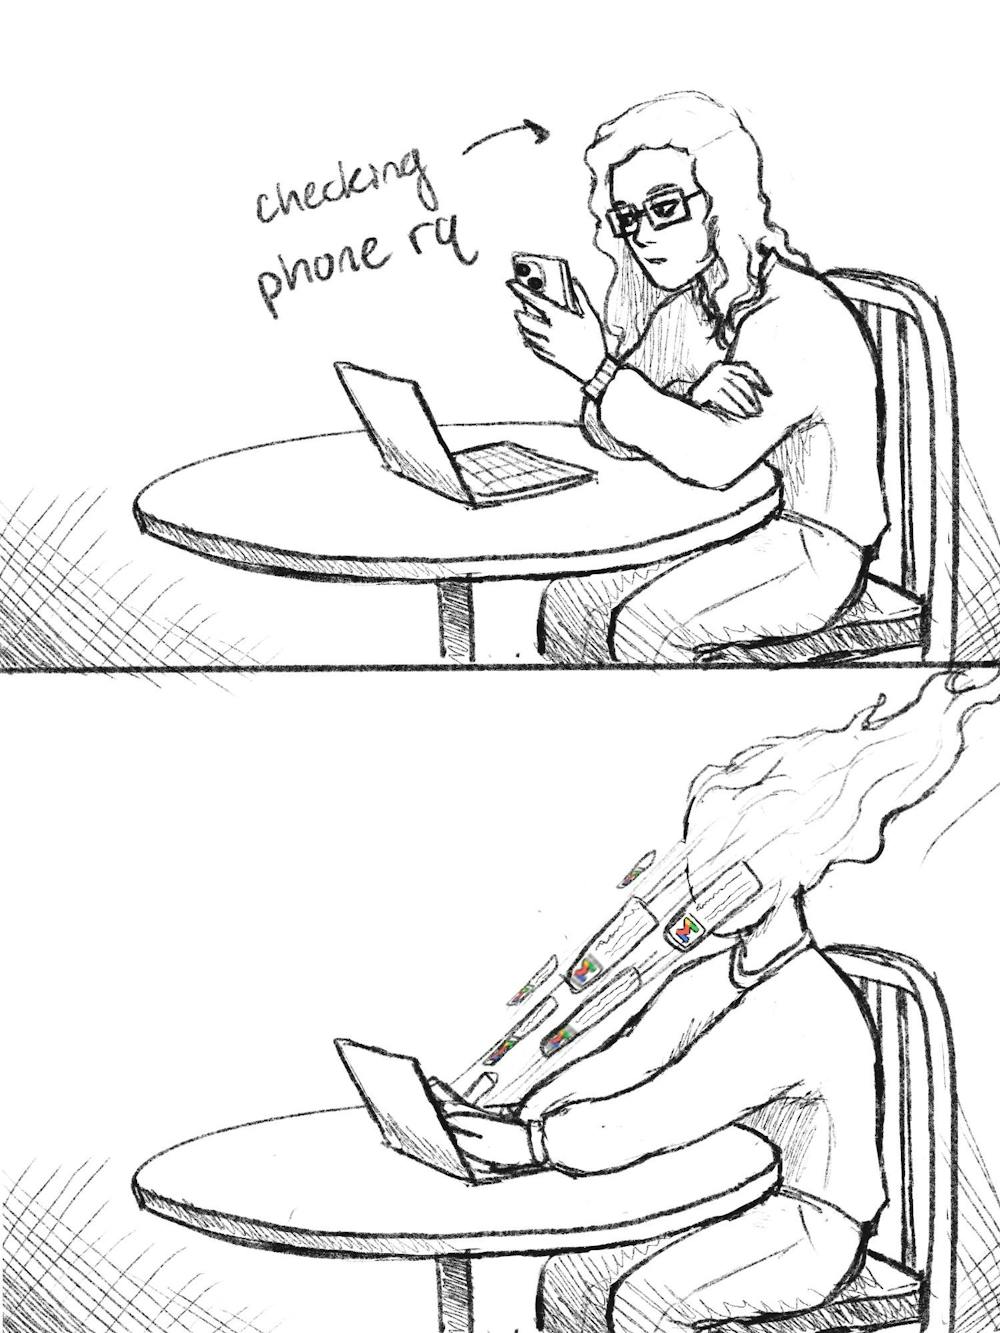 In the first panel a student with glasses is sitting at a table checking her phone. In the second panel she is being blasted in the face with a ton of gmail notifications. Line drawing.